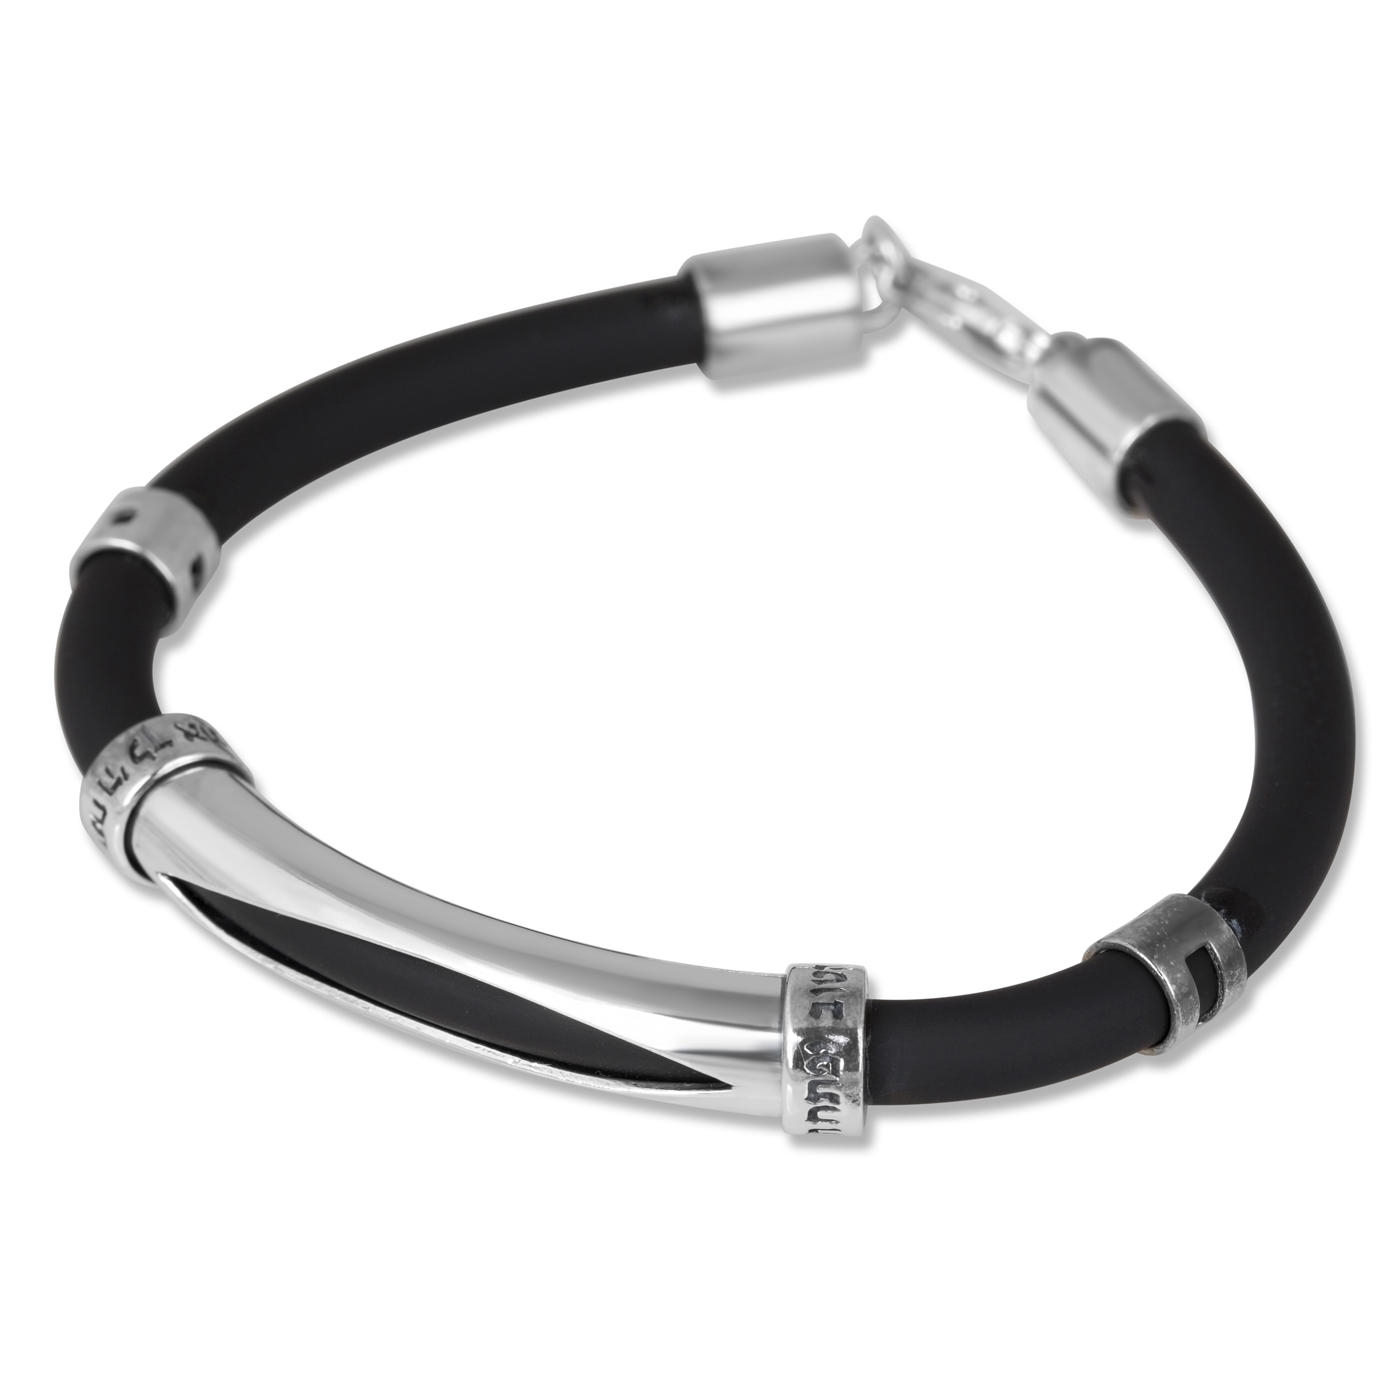 Sterling Silver and Silicon Bracelet with Open Slit and Engraved Edges - 1